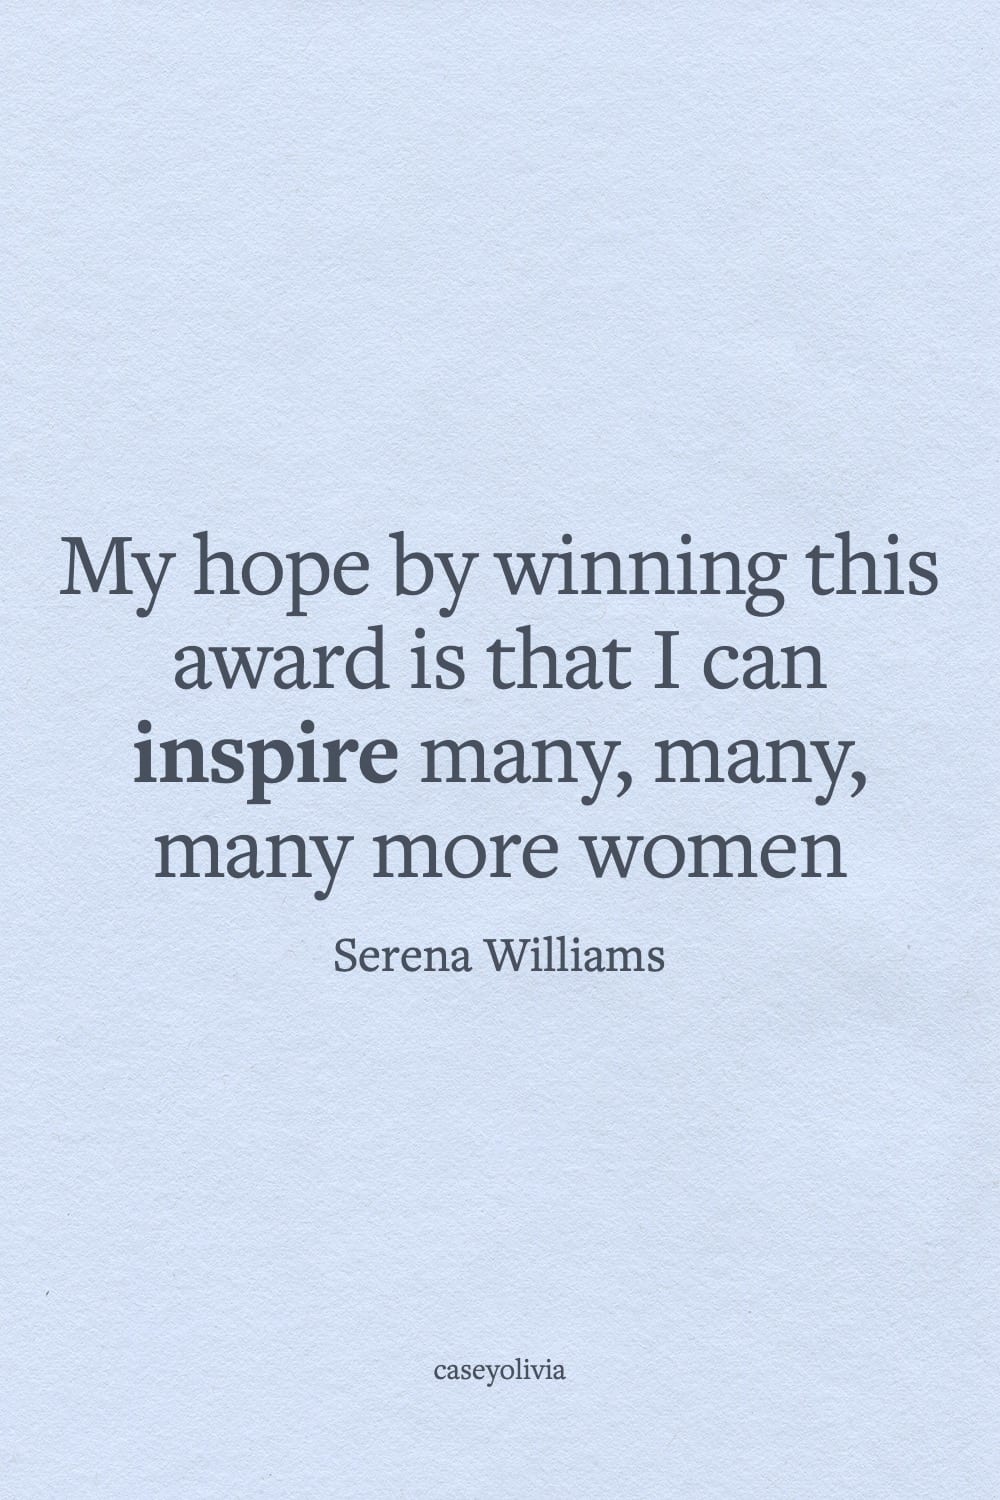 inspire many many women quote for empowerment